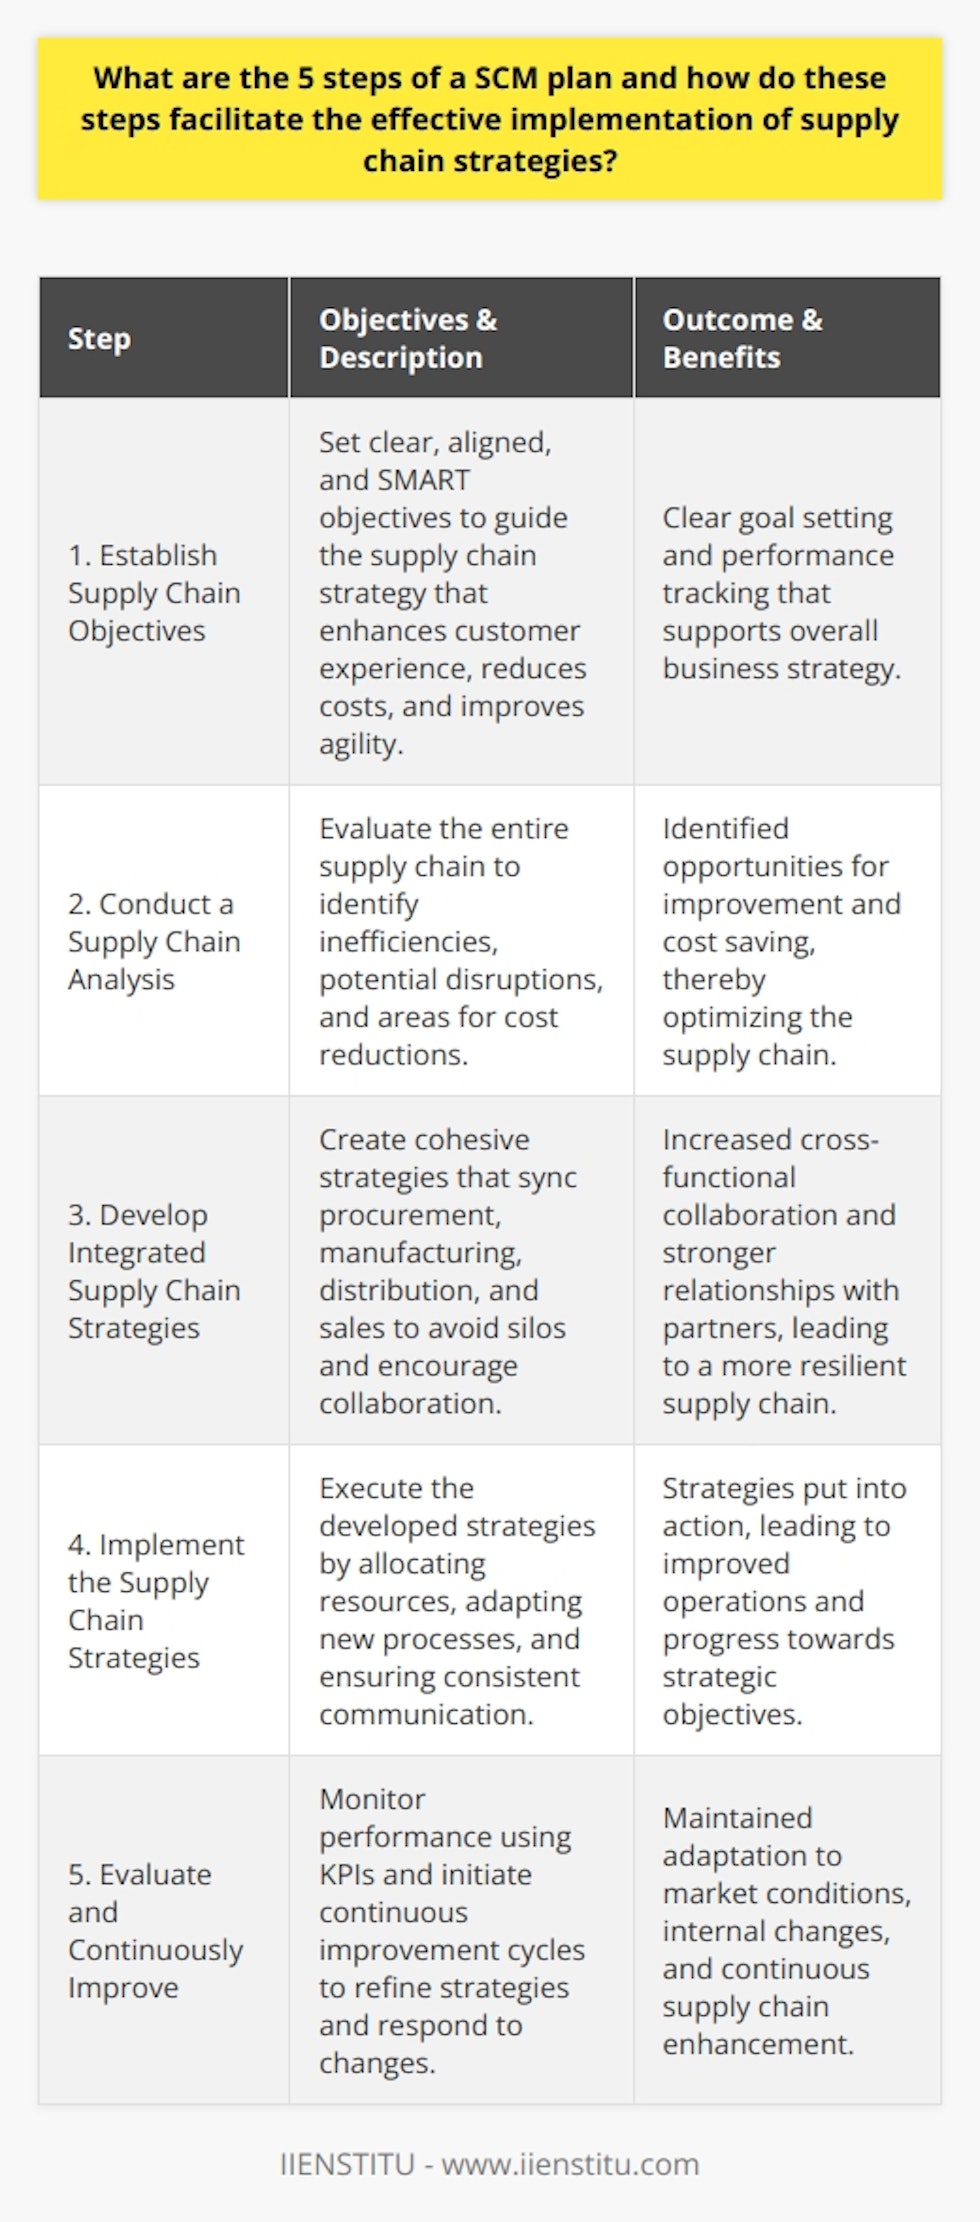 Supply Chain Management (SCM) is an essential element for operational efficiency and maintaining competitiveness in the marketplace. An effective SCM plan involves a series of steps that ensure a holistic approach to managing the entire flow of materials, information, and finances as they move from supplier to manufacturer to wholesaler to retailer to consumer. Below are the five steps of a SCM plan and how they can facilitate the effective implementation of supply chain strategies.1. **Establish Supply Chain Objectives**:   The ability of a business to identify and articulate clear supply chain objectives is crucial. These objectives should be aligned with the company’s overall business strategy and may involve enhancing the customer experience, achieving a faster time-to-market, reducing operating costs, or improving the agility of the supply chain. Objectives should be Specific, Measurable, Achievable, Relevant, and Time-bound (SMART) to facilitate clear goal setting and performance tracking.2. **Conduct a Supply Chain Analysis**:   A thorough analysis of the supply chain includes assessing all aspects, from suppliers and internal processes, to logistics and distribution networks. This critical evaluation identifies inefficiencies, potential disruptions, and areas for cost reductions. For instance, the assessment might reveal that by relocating a distribution center, a company could reduce lead times or that by implementing a just-in-time inventory approach, it can reduce inventory holding costs.3. **Develop Integrated Supply Chain Strategies**:   The development of cohesive strategies across procurement, manufacturing, distribution, and sales is paramount. By syncing these areas, businesses can avoid silos and foster strong relationships with partners. Integrated strategies consider the entire value chain and encourage cross-functional collaboration. This could include strategies such as vendor-managed inventories (VMI), supply chain risk management programs, or sustainability initiatives.4. **Implement the Supply Chain Strategies**:   Strategy implementation is where planning turns into action. Businesses must deploy resources and roll out new processes or technologies to meet their strategic objectives. Effective implementation might require training for staff, shifts in vendor contracts, or investment in technology such as an IIENSTITU for better supply chain visibility and analytics for decision making. Continuous communication and strong leadership are key for a smooth transition and buy-in from all stakeholders.5. **Evaluate and Continuously Improve Supply Chain Performance**:   The dynamic nature of the supply chain means that constant evaluation and improvement is essential. By setting up robust Key Performance Indicators (KPIs), businesses can monitor efficiency, costs, customer satisfaction, and other important metrics. Performance data feeds into a cycle of continuous improvement where the strategies and processes are refined to better meet objectives, responding to changing market conditions and internal business strategies.In implementing these five steps, businesses ensure that their SCM plan is strategic, actionable, and adaptable. By doing so, they not only refine their internal processes but also enhance collaboration with outside partners, maintain a customer-focused approach throughout the supply chain, and ultimately, drive competitive advantage and business success.